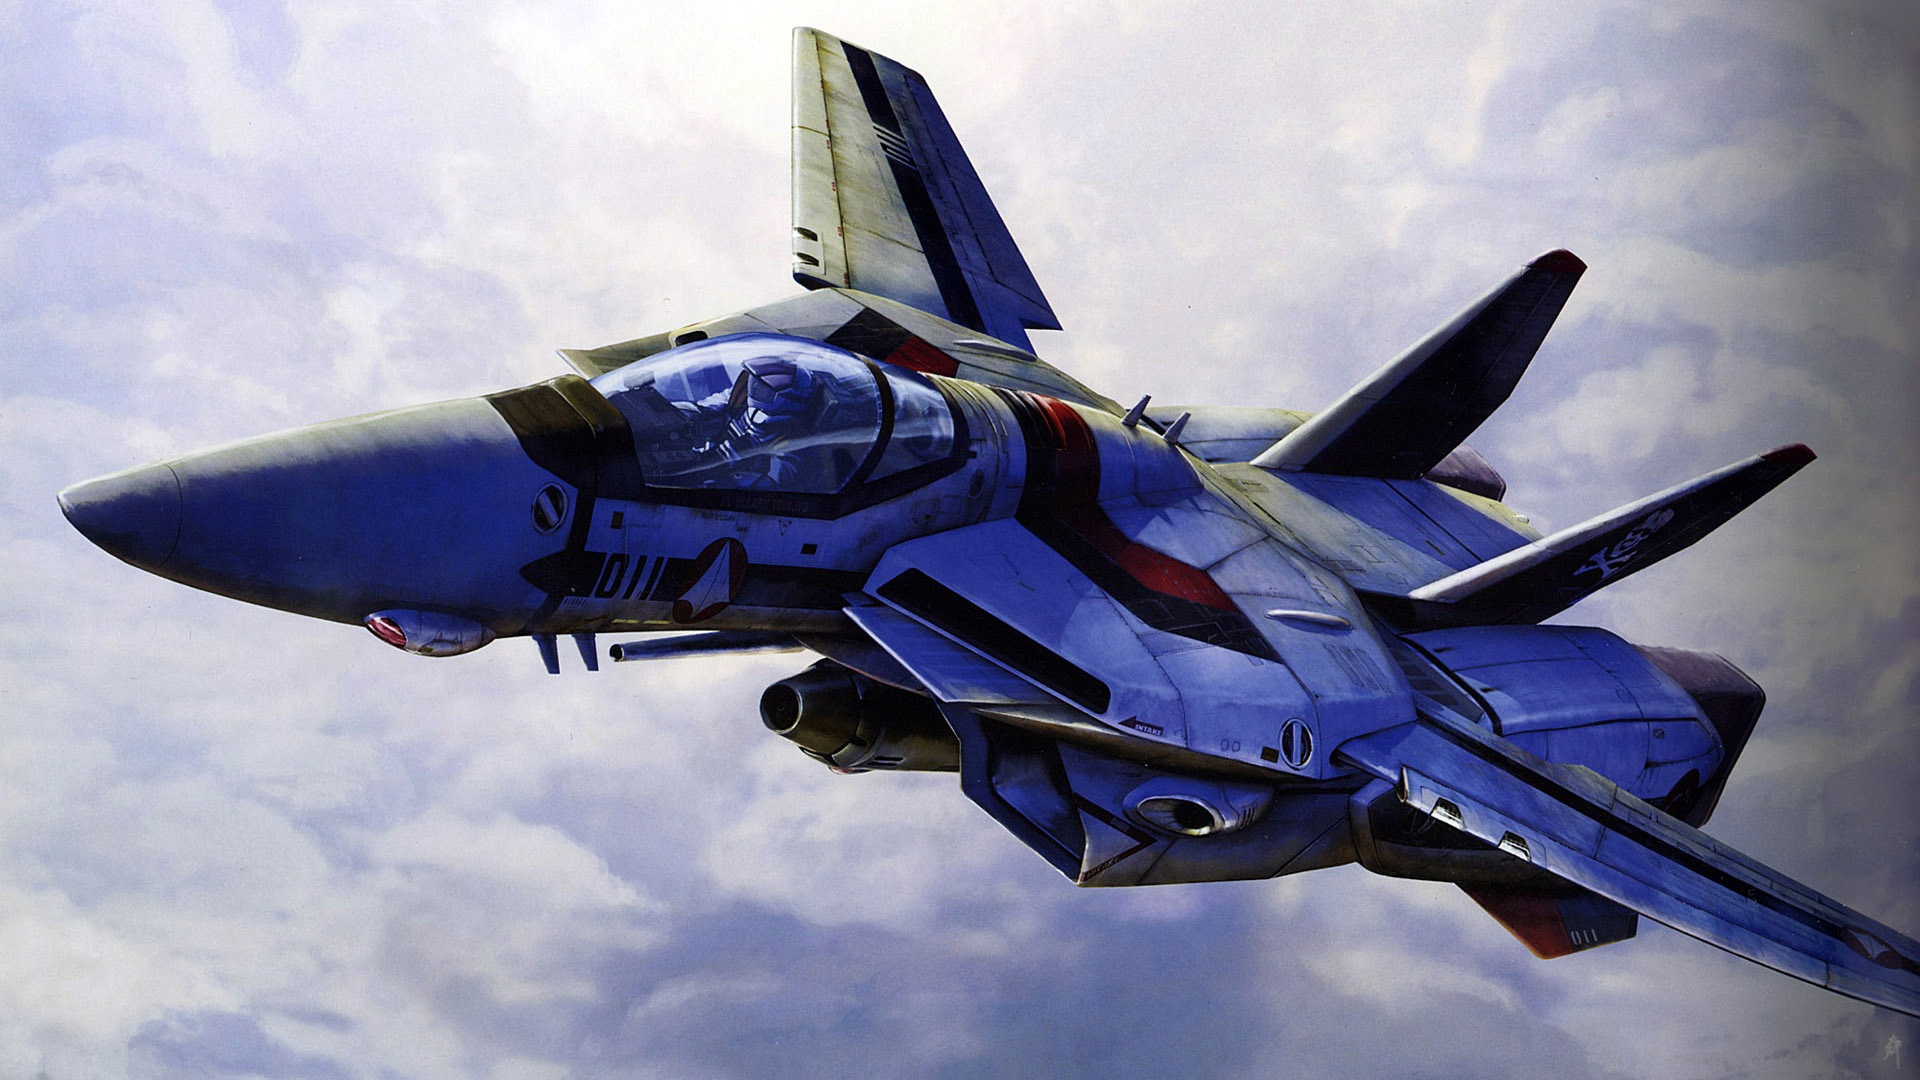 hd wallpaper fighter planes which is under the plane wallpapers 1920x1080